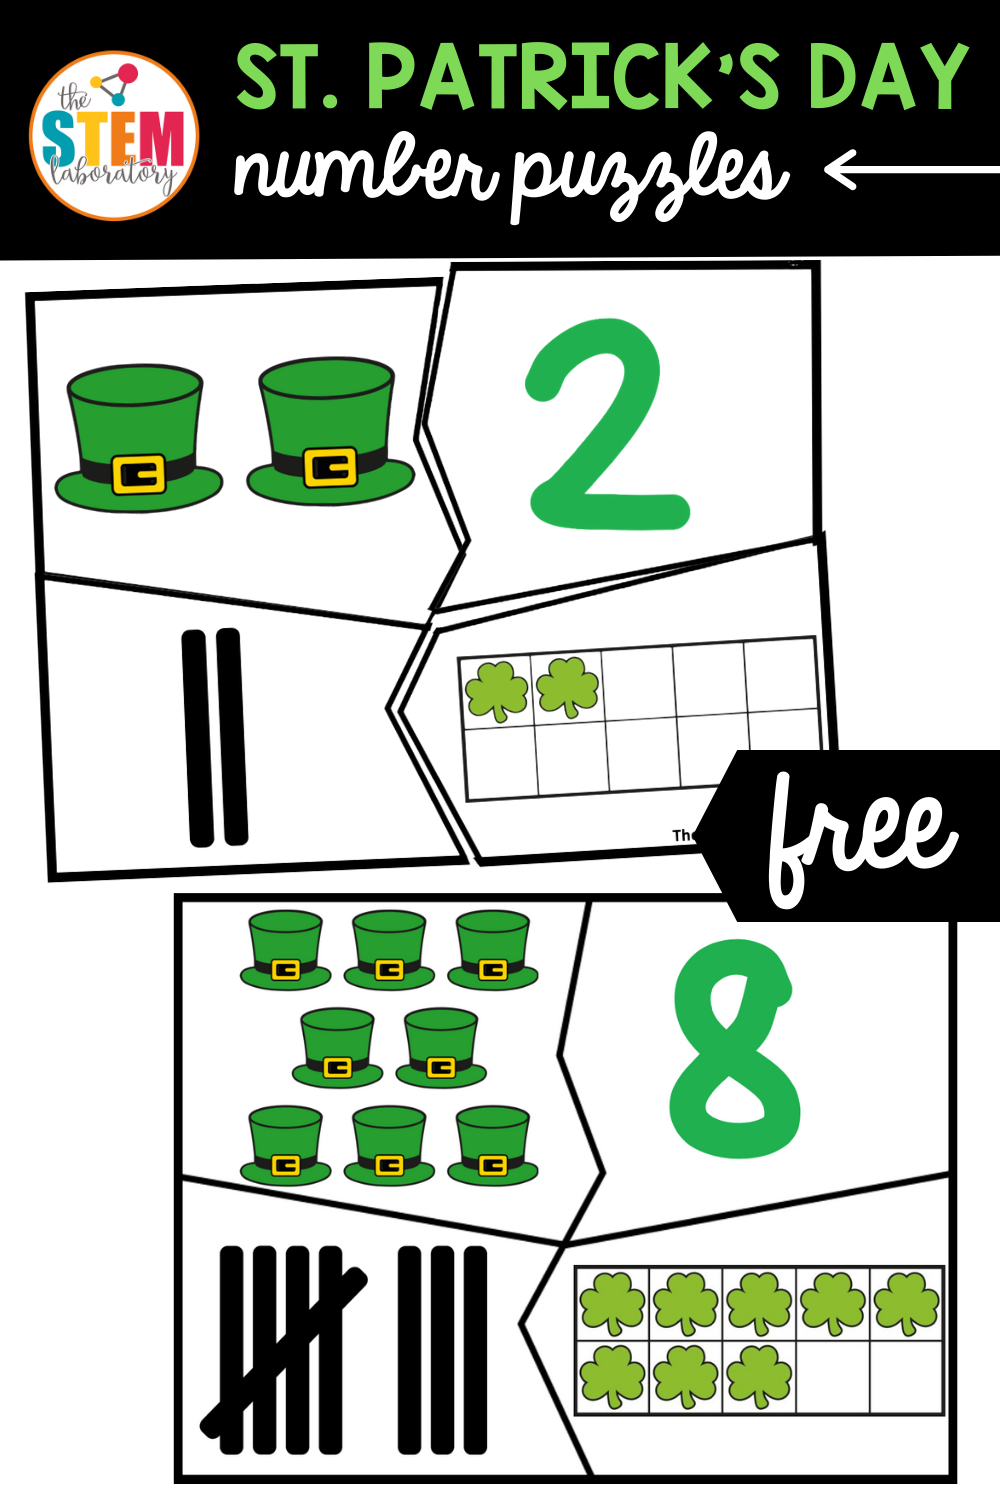 St. Patrick’s Day Number Puzzles